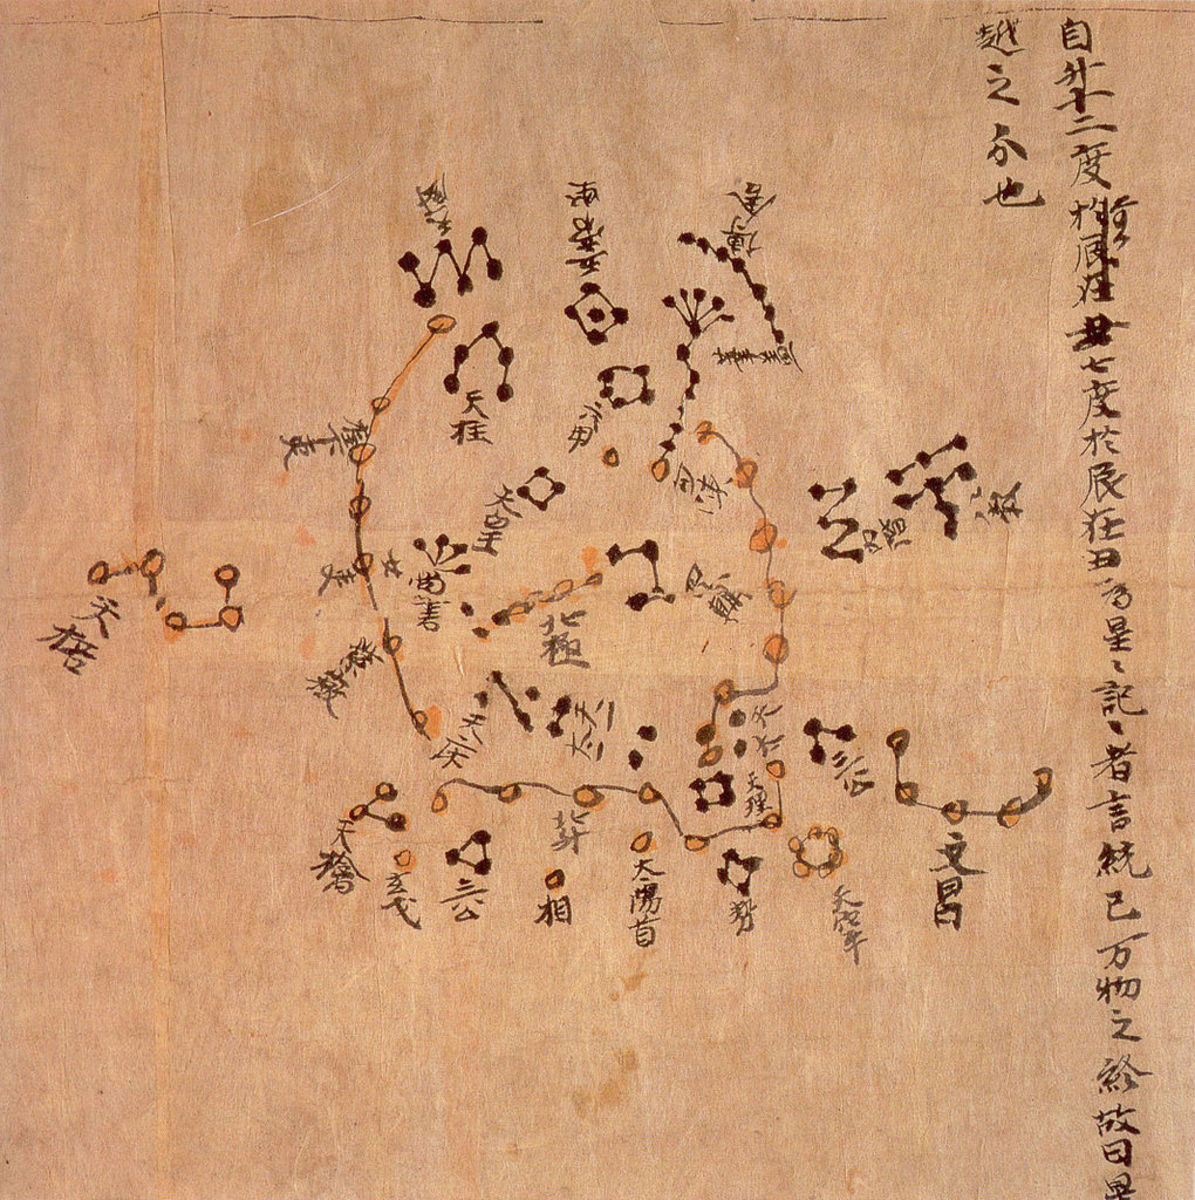 The Chinese Dunhuang star map of 700 AD. Ursa Major, Sagittarius and Capricornus are recognizable. The three colors (white, black and yellow) indicate the schools of astronomy of Shih Shen, Kan Te and Wu Hsien.